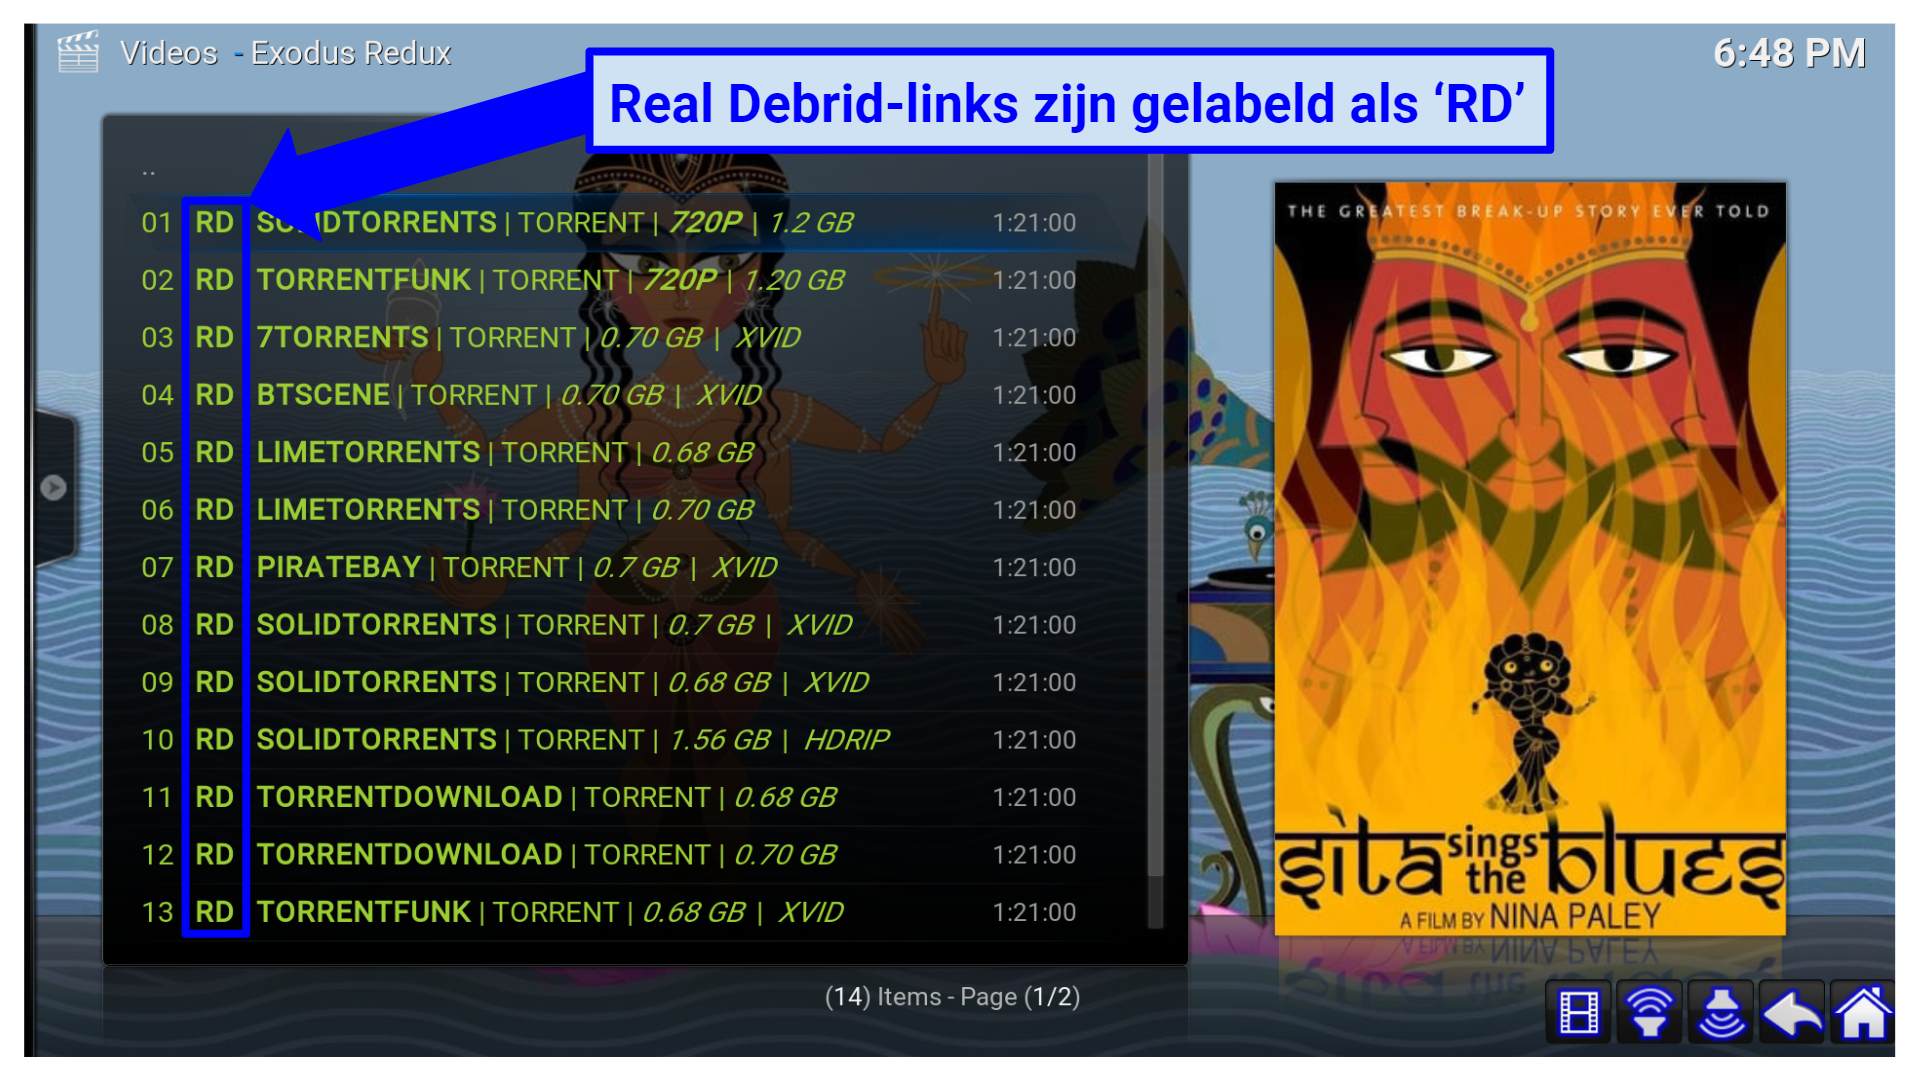 Graphic showing Real Debrid links